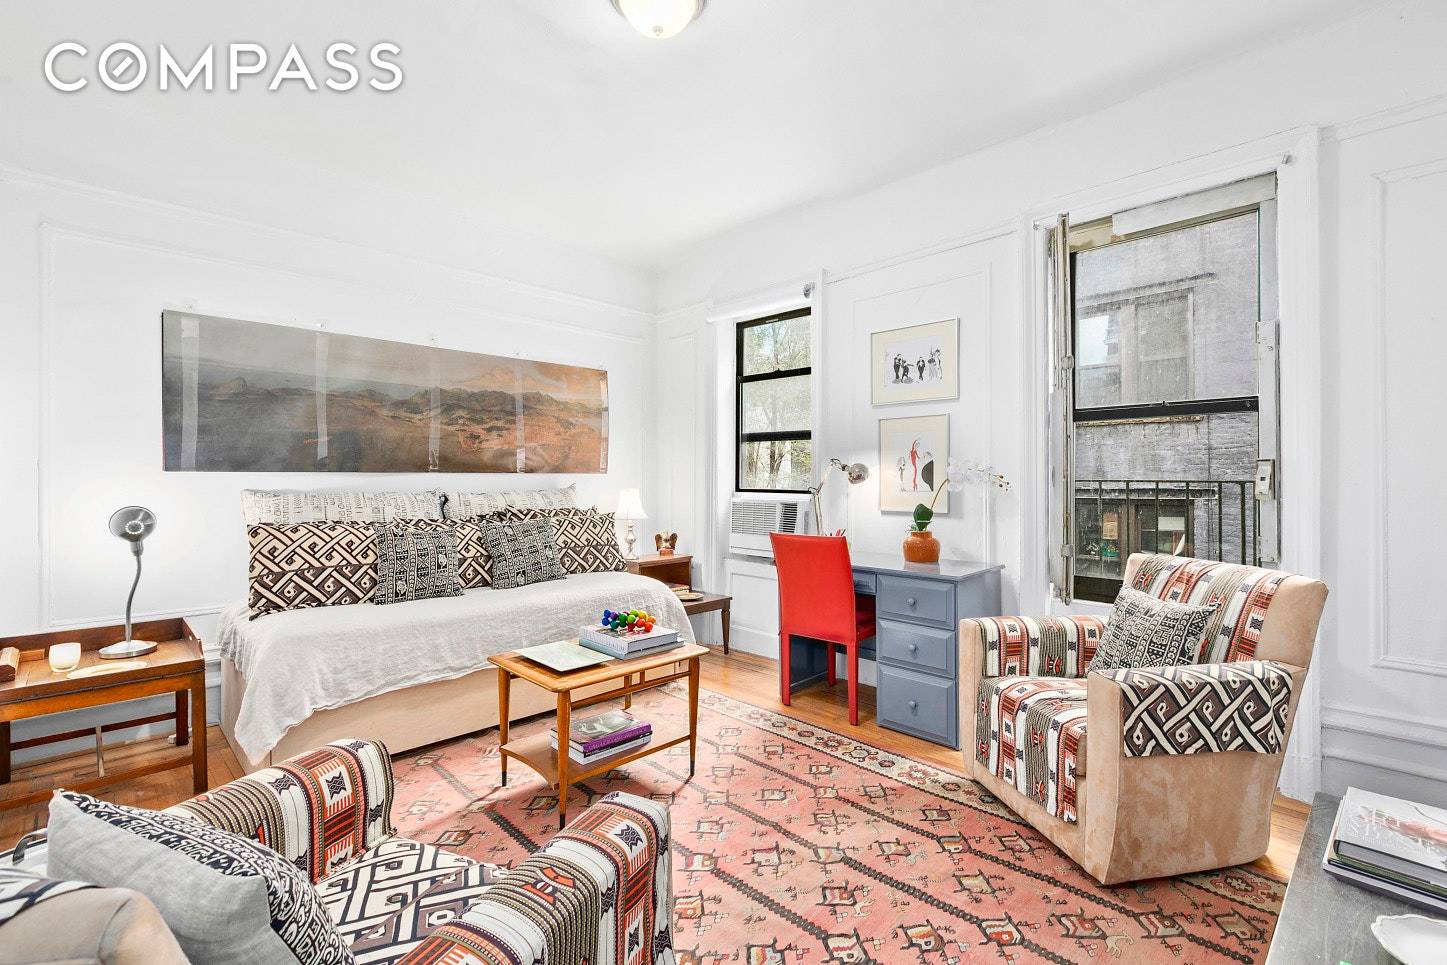 This is, perhaps, the most charming apartment you've seen in a long time.